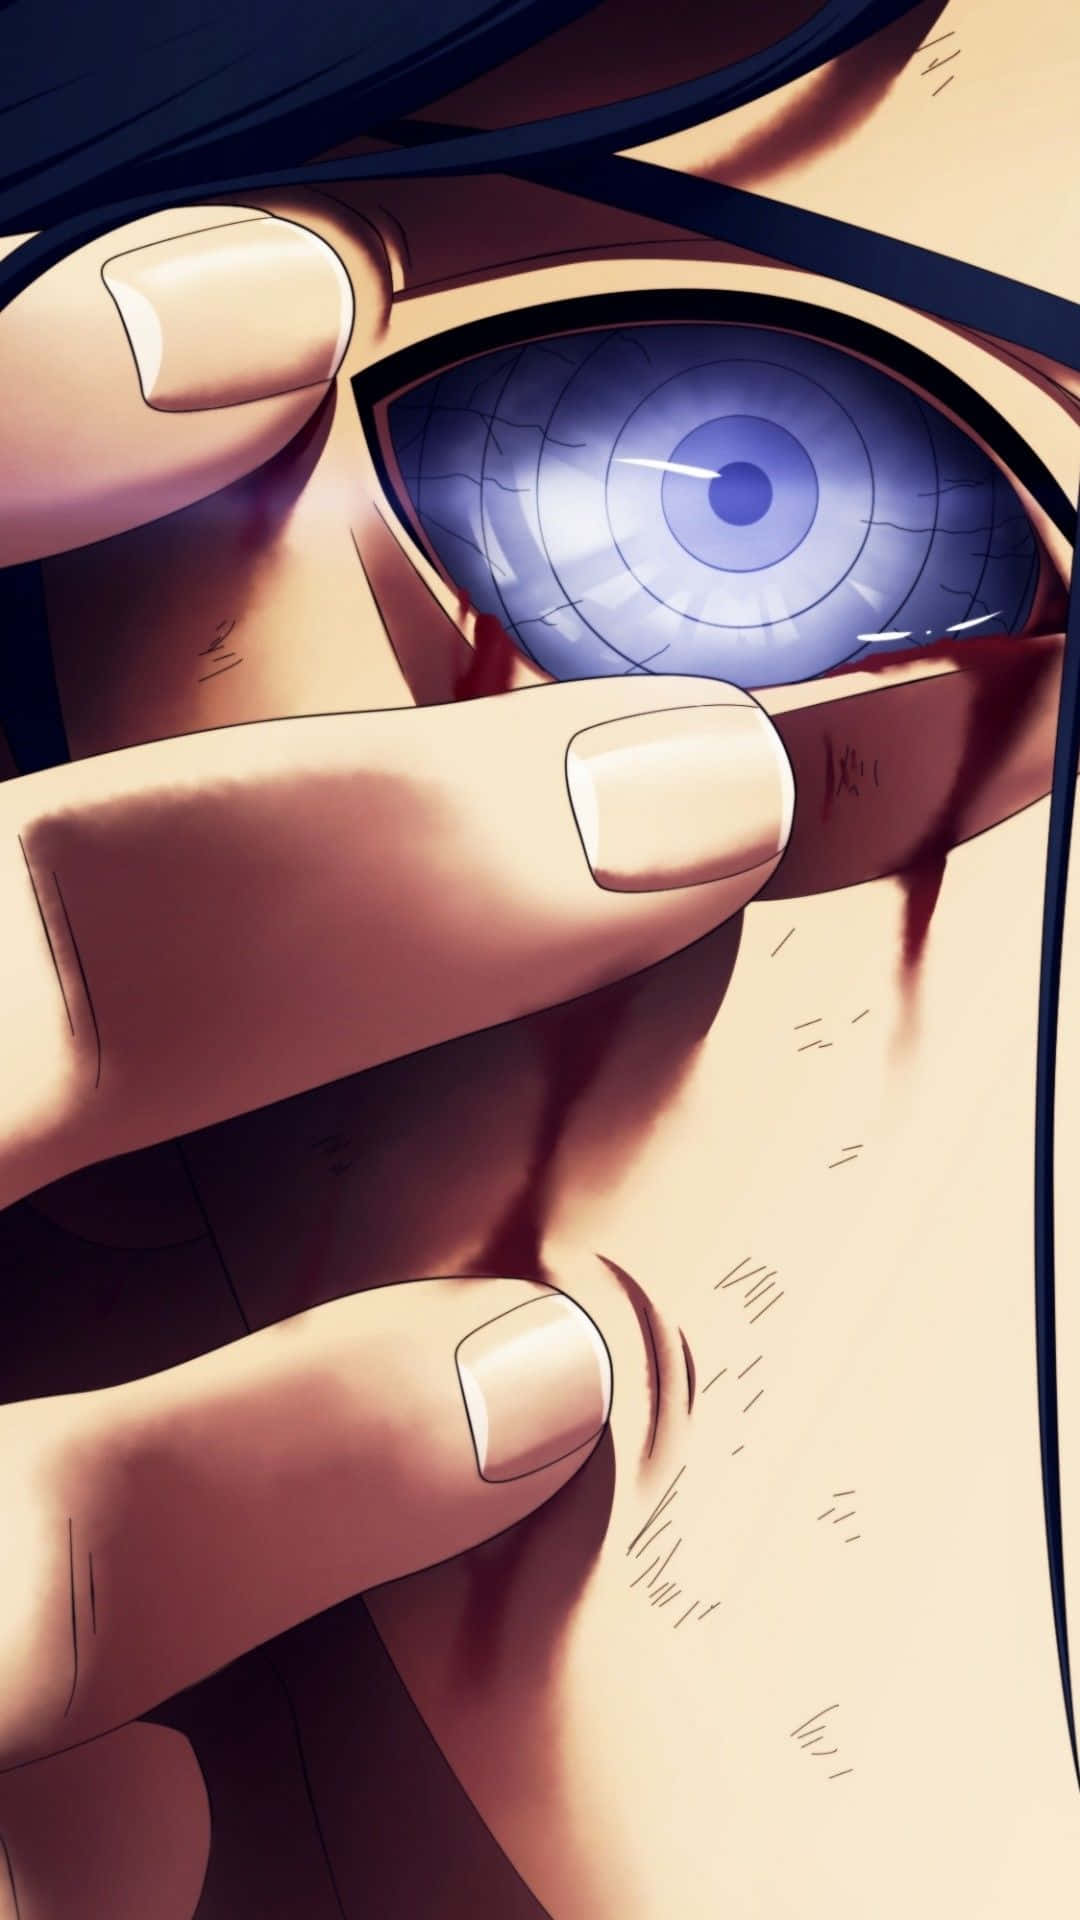 Enjoy your favorite anime character, Naruto, on your phone with the Naruto Shippuden iPhone Wallpaper Wallpaper